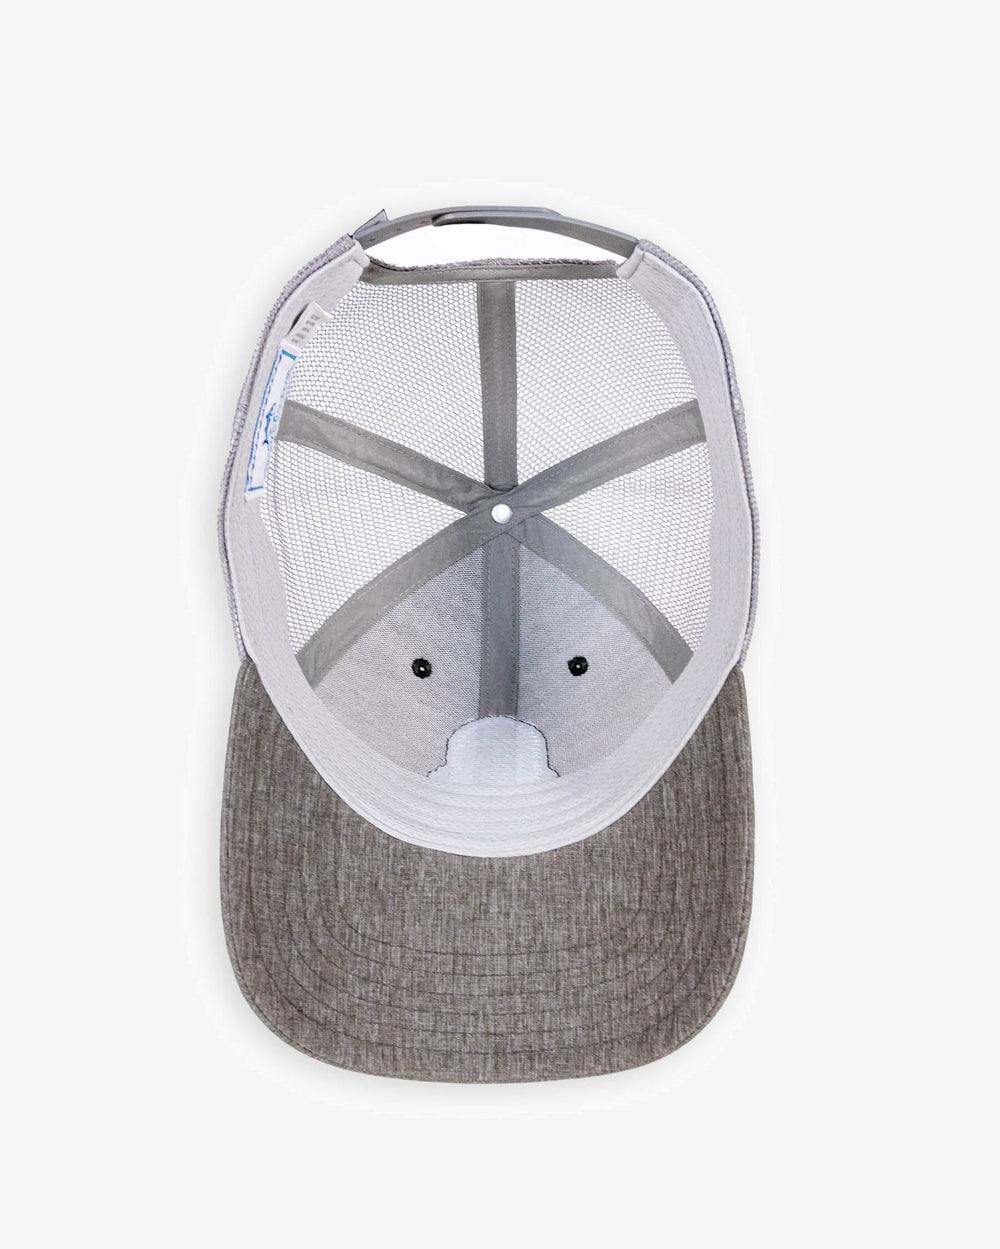 The detail view of the Southern Tide Three Palms Performance Trucker Hat by Southern Tide - Heather Khaki